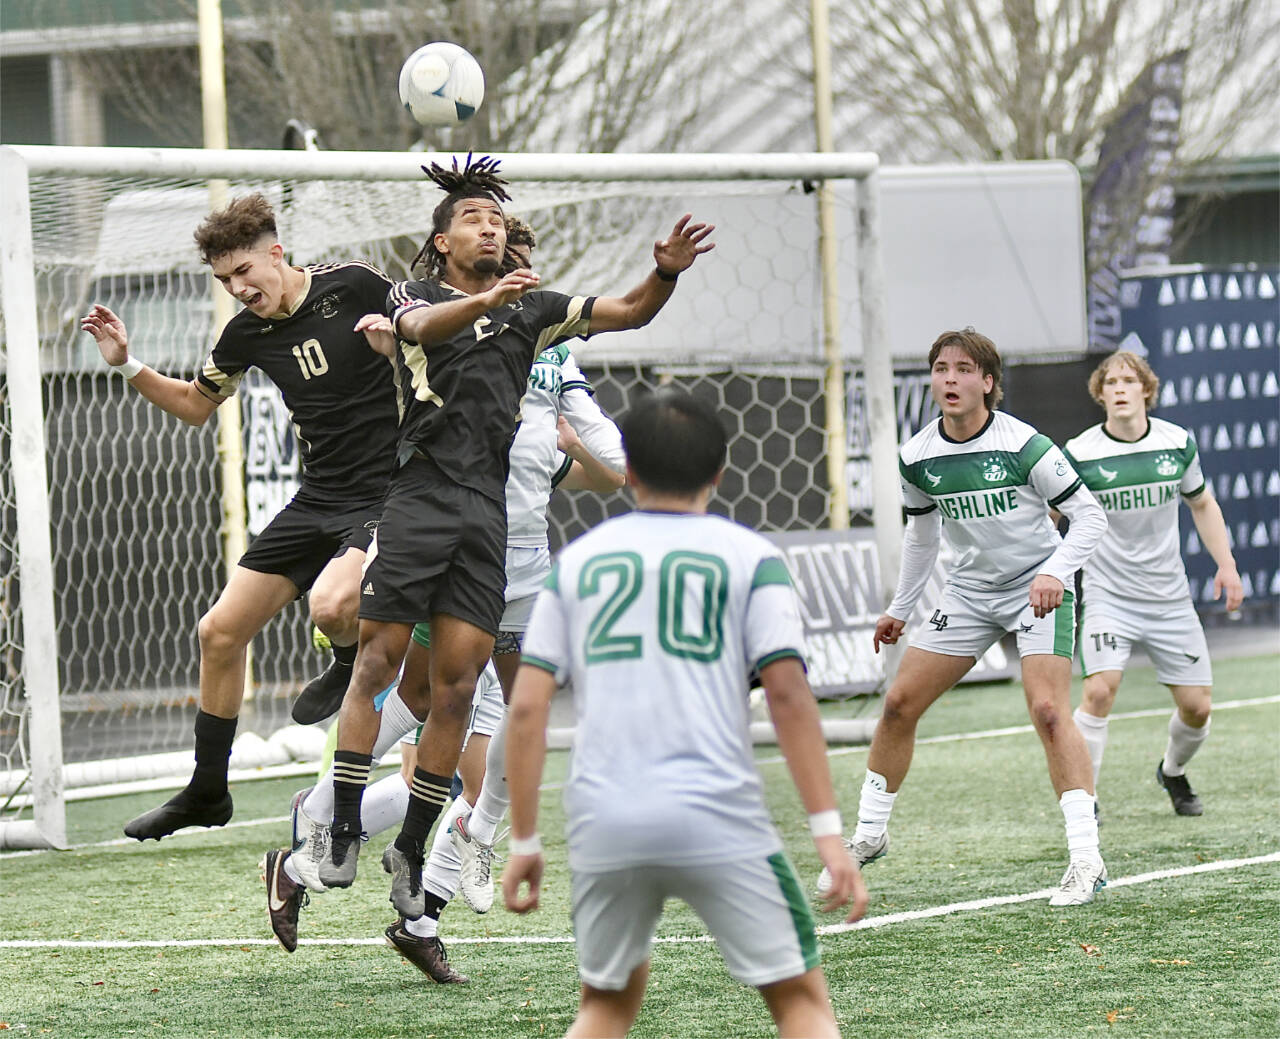 Photo by Jay Cline/Peninsula College
Peninsula College’s Nil Grau, left, and Abdurahim Leigh battle for a ball in front of the Highline net in the NWAC title game on Nov. 12 in Tukwila.